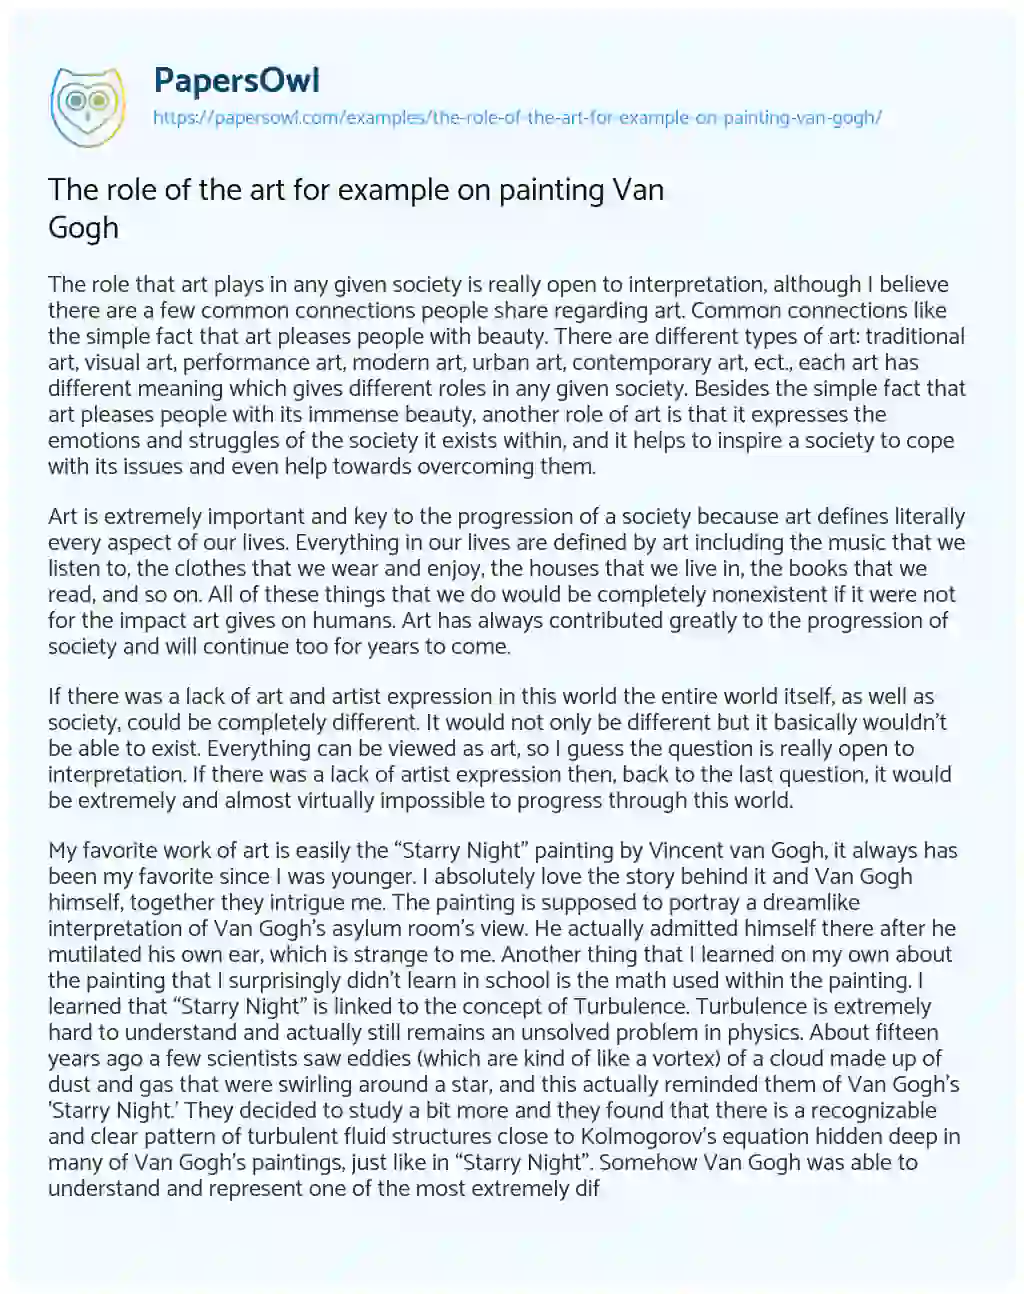 Essay on The Role of the Art for Example on Painting Van Gogh